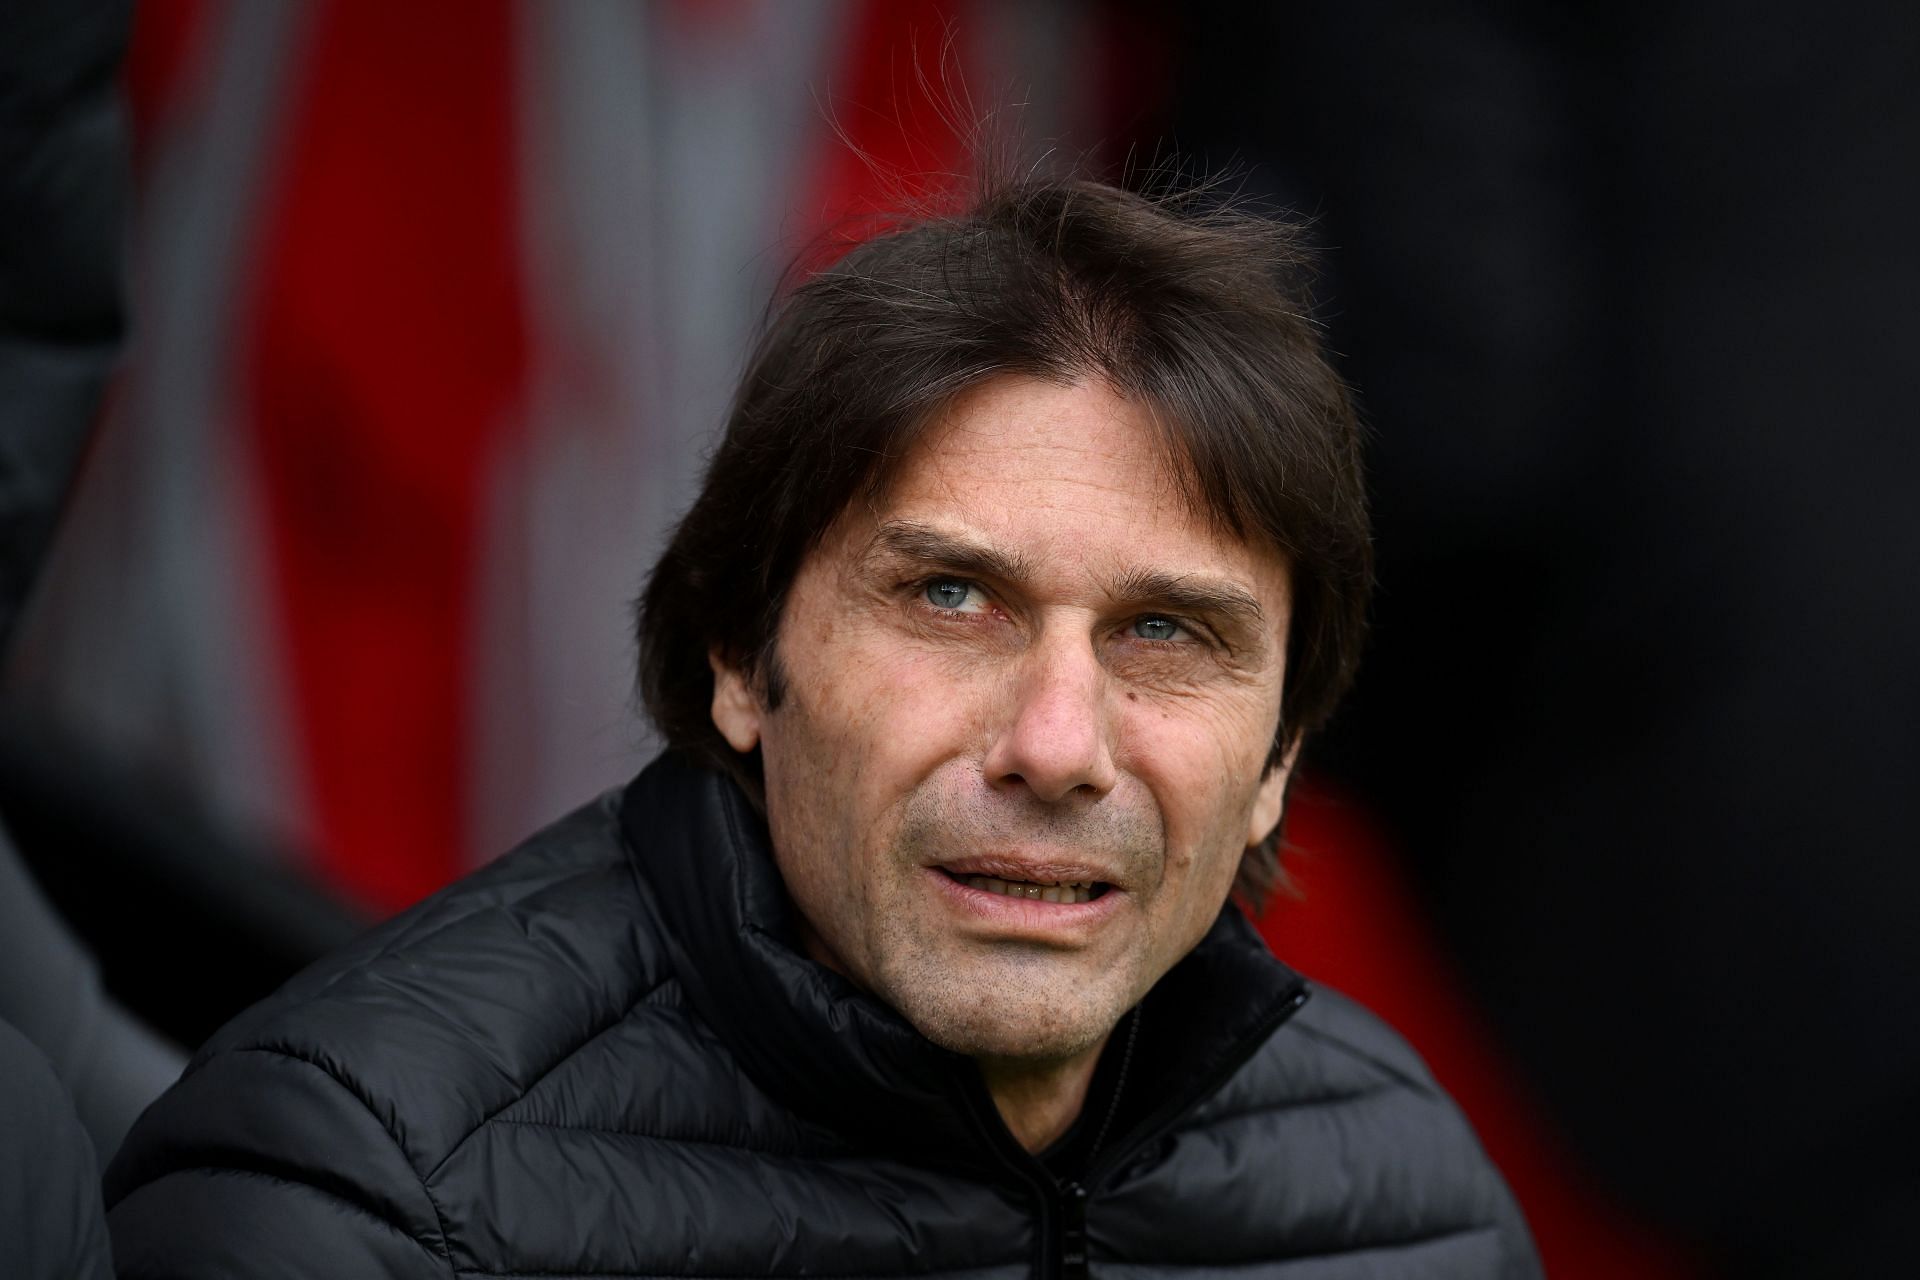 Antonio Conte is yet to take up his next assignment